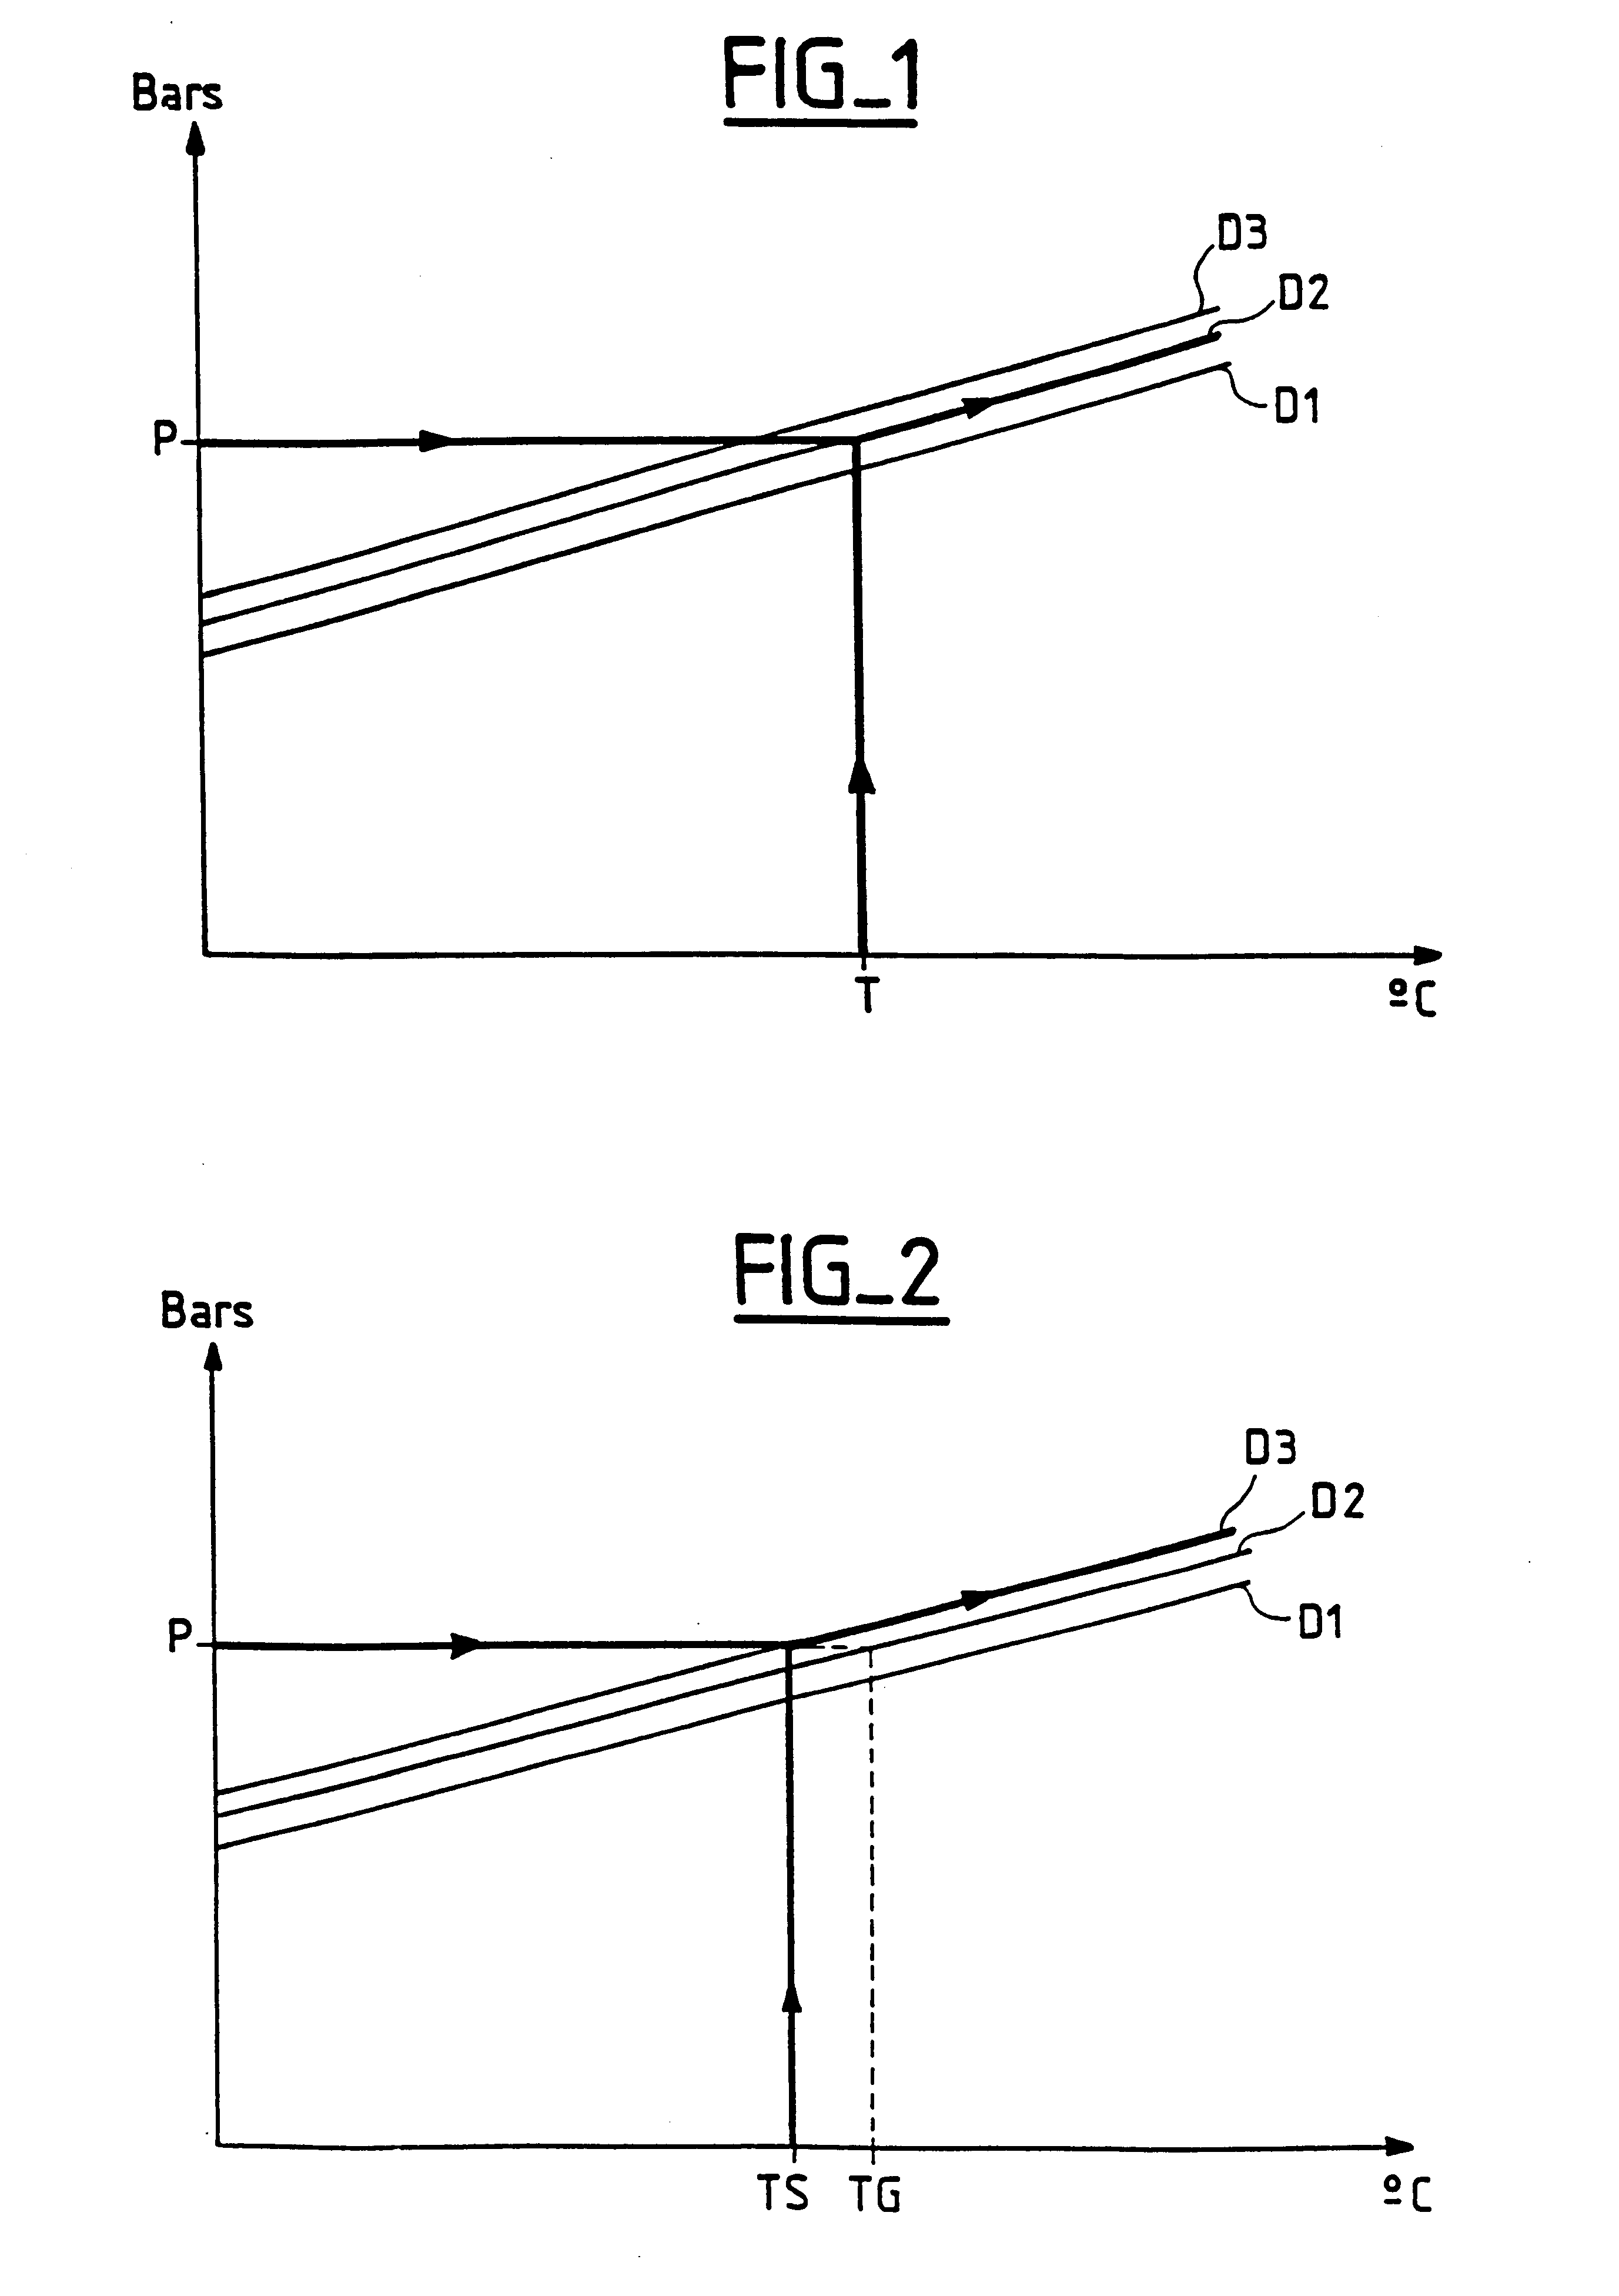 Method of measuring the density of a dielectric gas in a buried metal-clad line